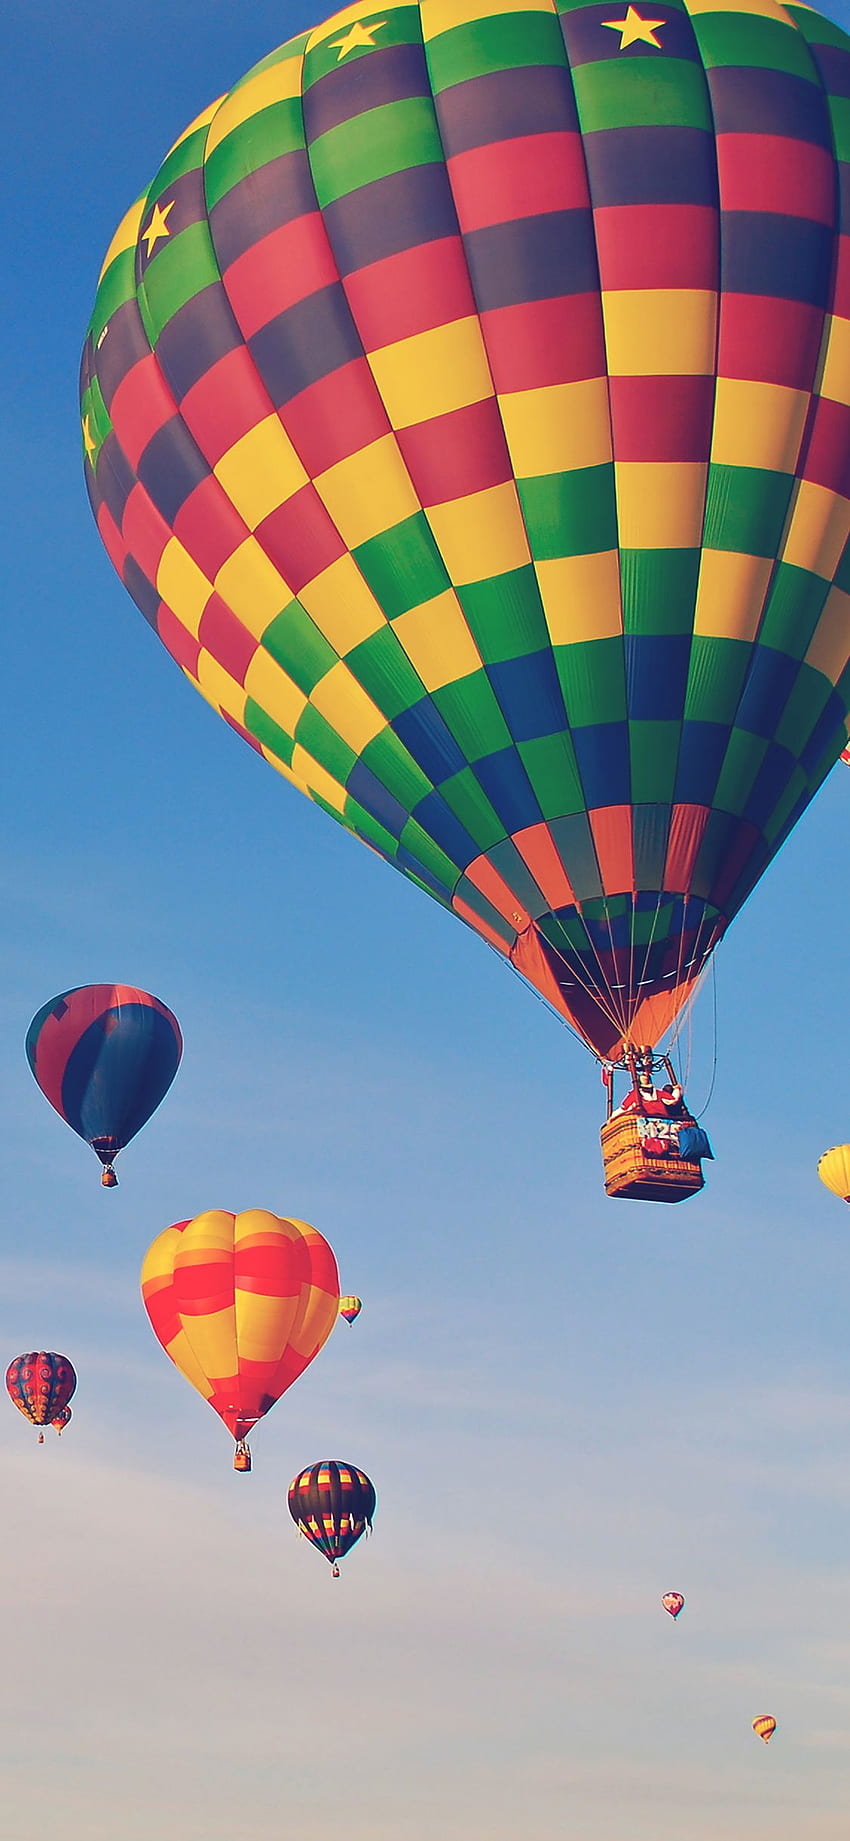 iPhonePapers - hot air balloon party nature sky HD phone wallpaper